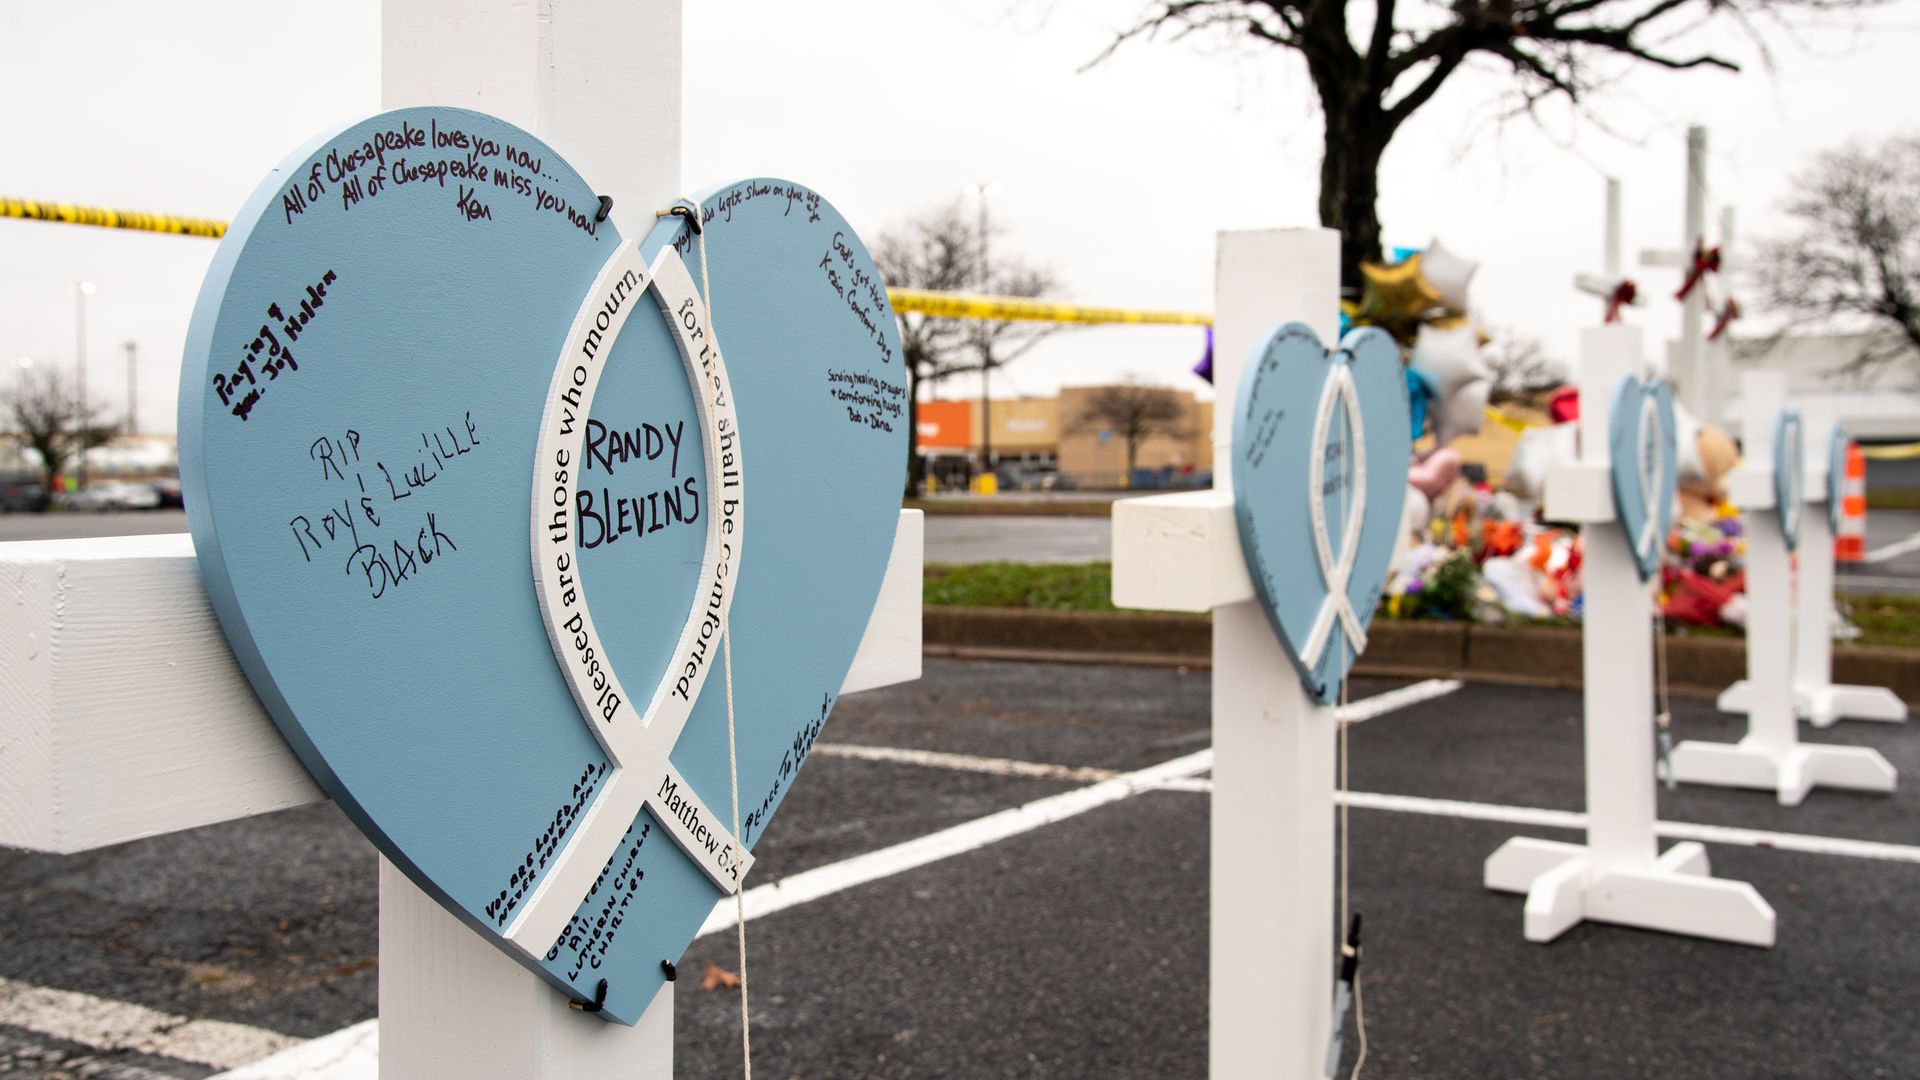 Crosses, placed for the victims of the Walmart shooting, are placed in the parking lot of the Walmart on November 25, 2022.